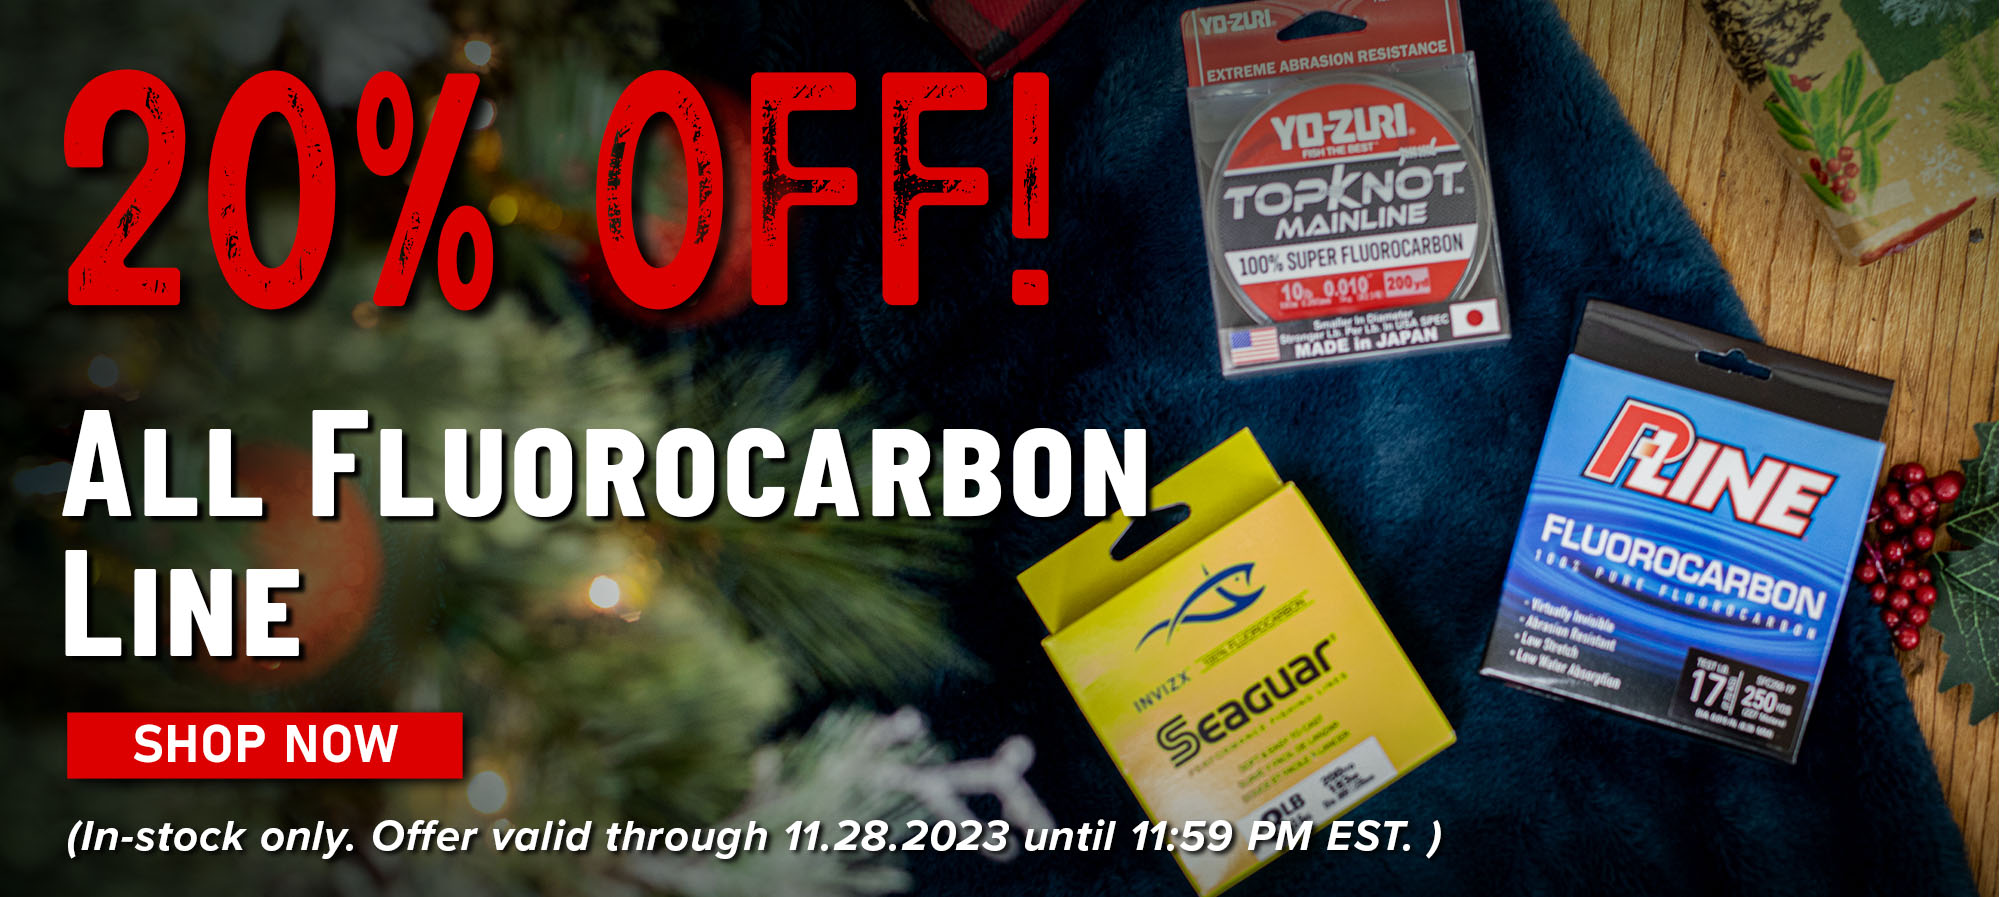 20% Off! All Fluorocarbon Line Shop Now (In-stock only. Offer valid through 11.28.2023 until 11:59 PM EST.)